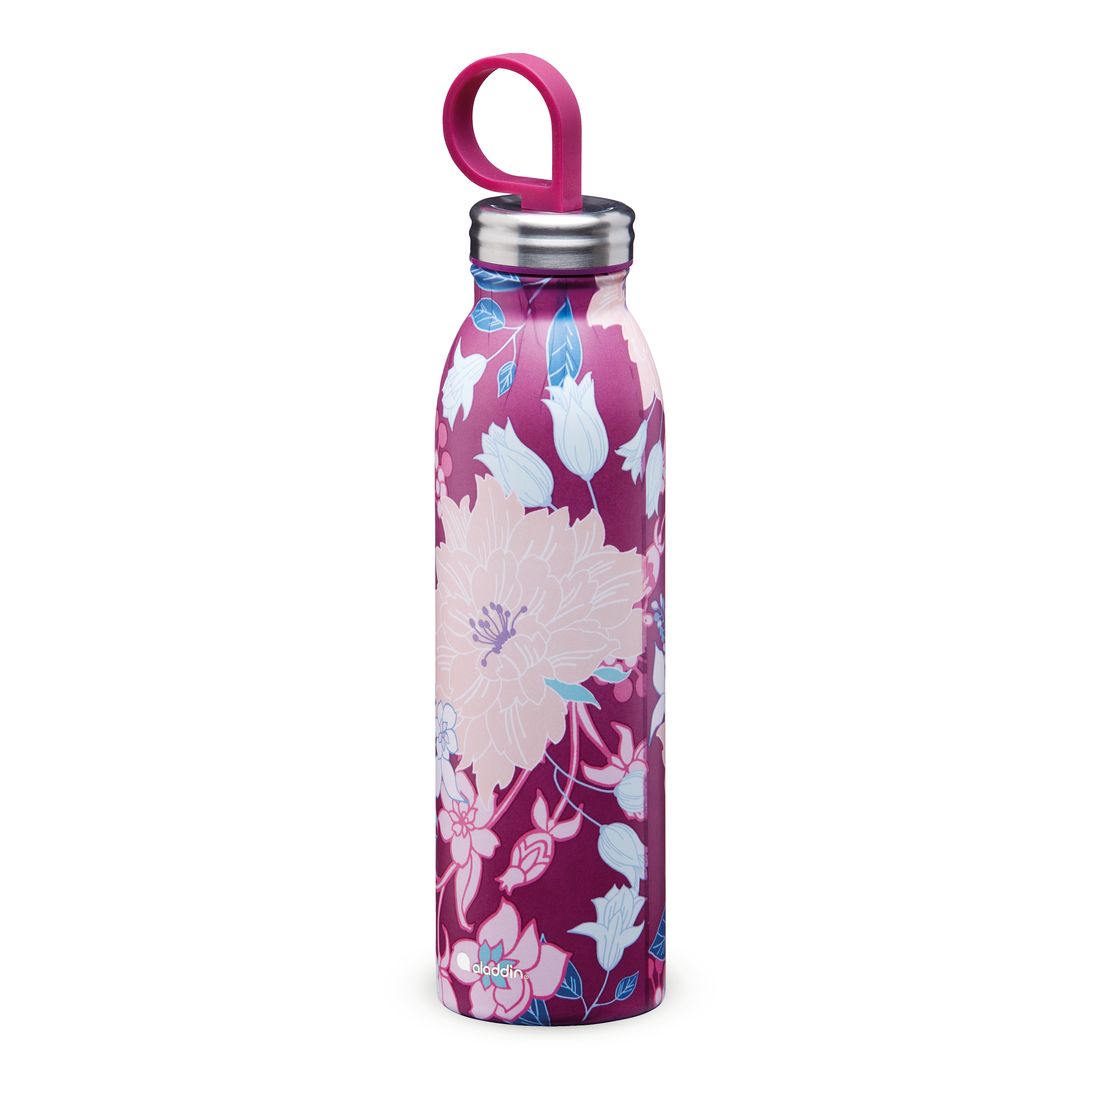 Aladdin Natio Chilled Thermavac Stainless Steel Water Bottle 550ml Dahlia Berry